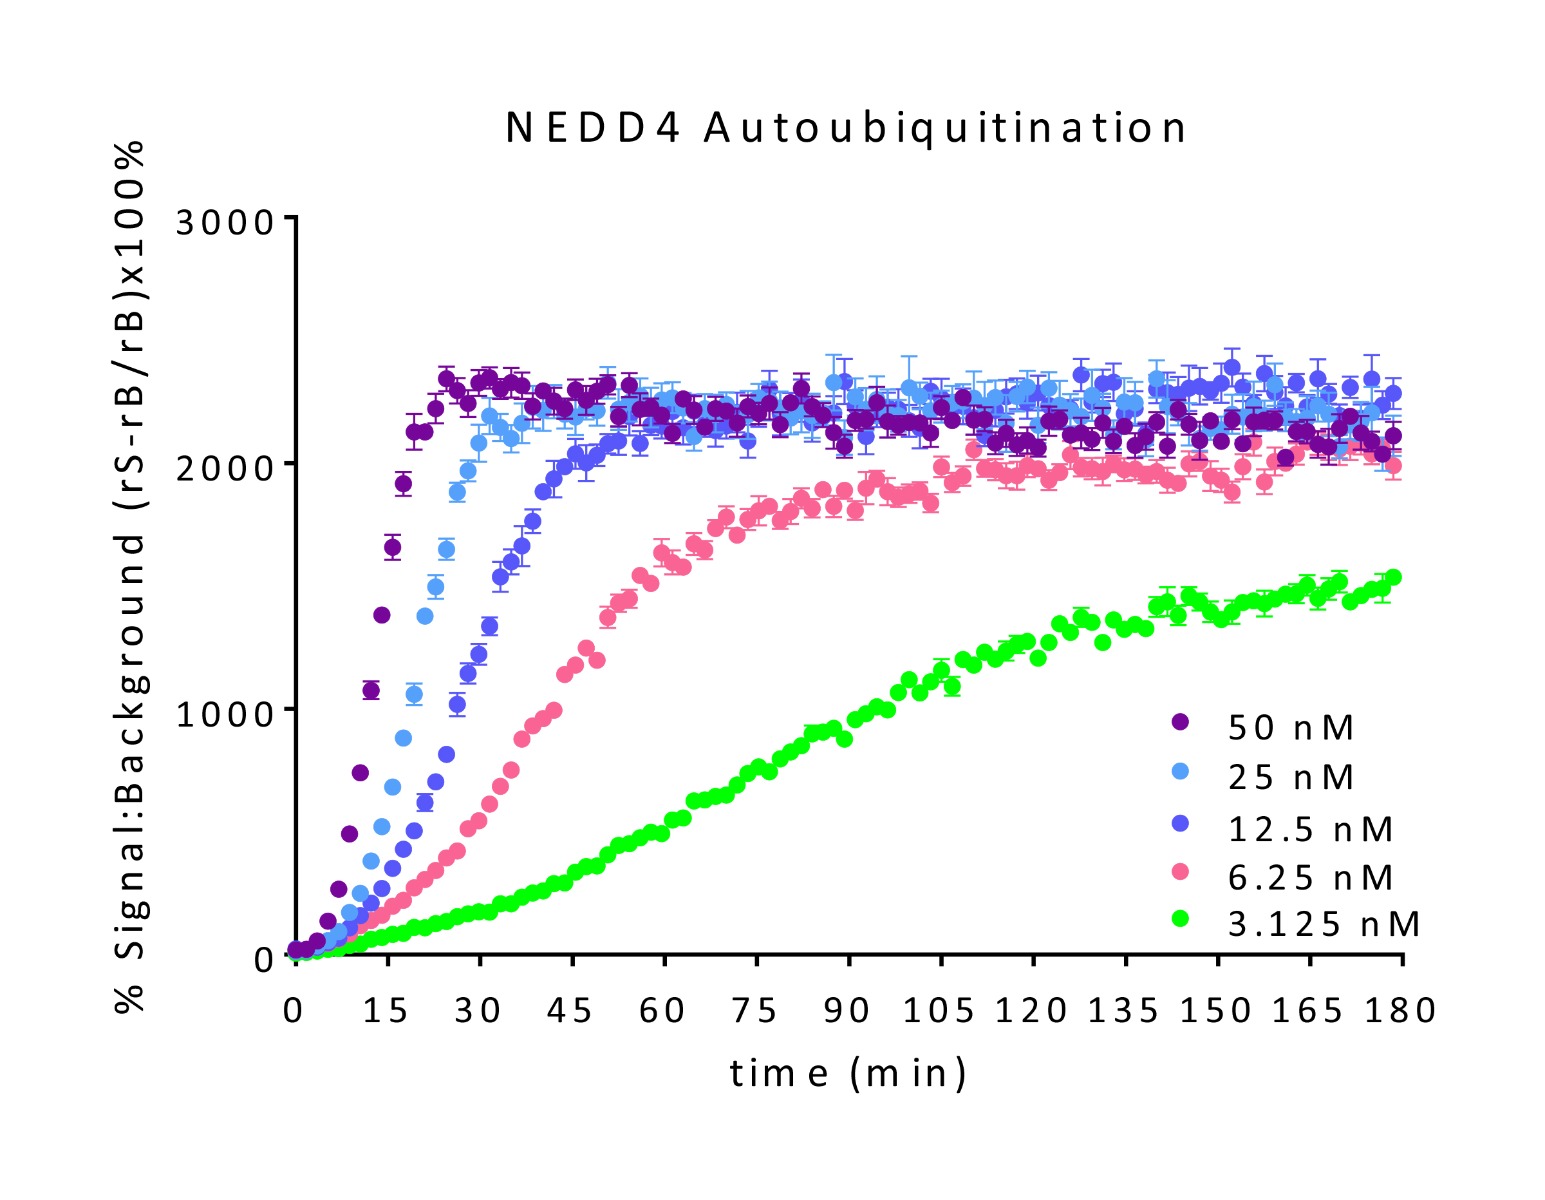 % Signal to Background of Continuous Real-Time TR-FRET NEDD4 titration (autoubiquitination): Serial dilutions of NEDD4 from 50nM to 3.125nM mixed with UBA1, UBE2L3, and, TRF-Ub mix. Reaction was initiated with addition of Mg-ATP.,Estimated Z-primes of Continuous Real-Time TR-FRET NEDD4 titration (autoubiquitination): Serial dilutions of NEDD4 from 50nm to 3.125nM mixed with UBA1, UBE2L3, and TRF-Ub mix. Reaction was initiated with addition of Mg-ATP.